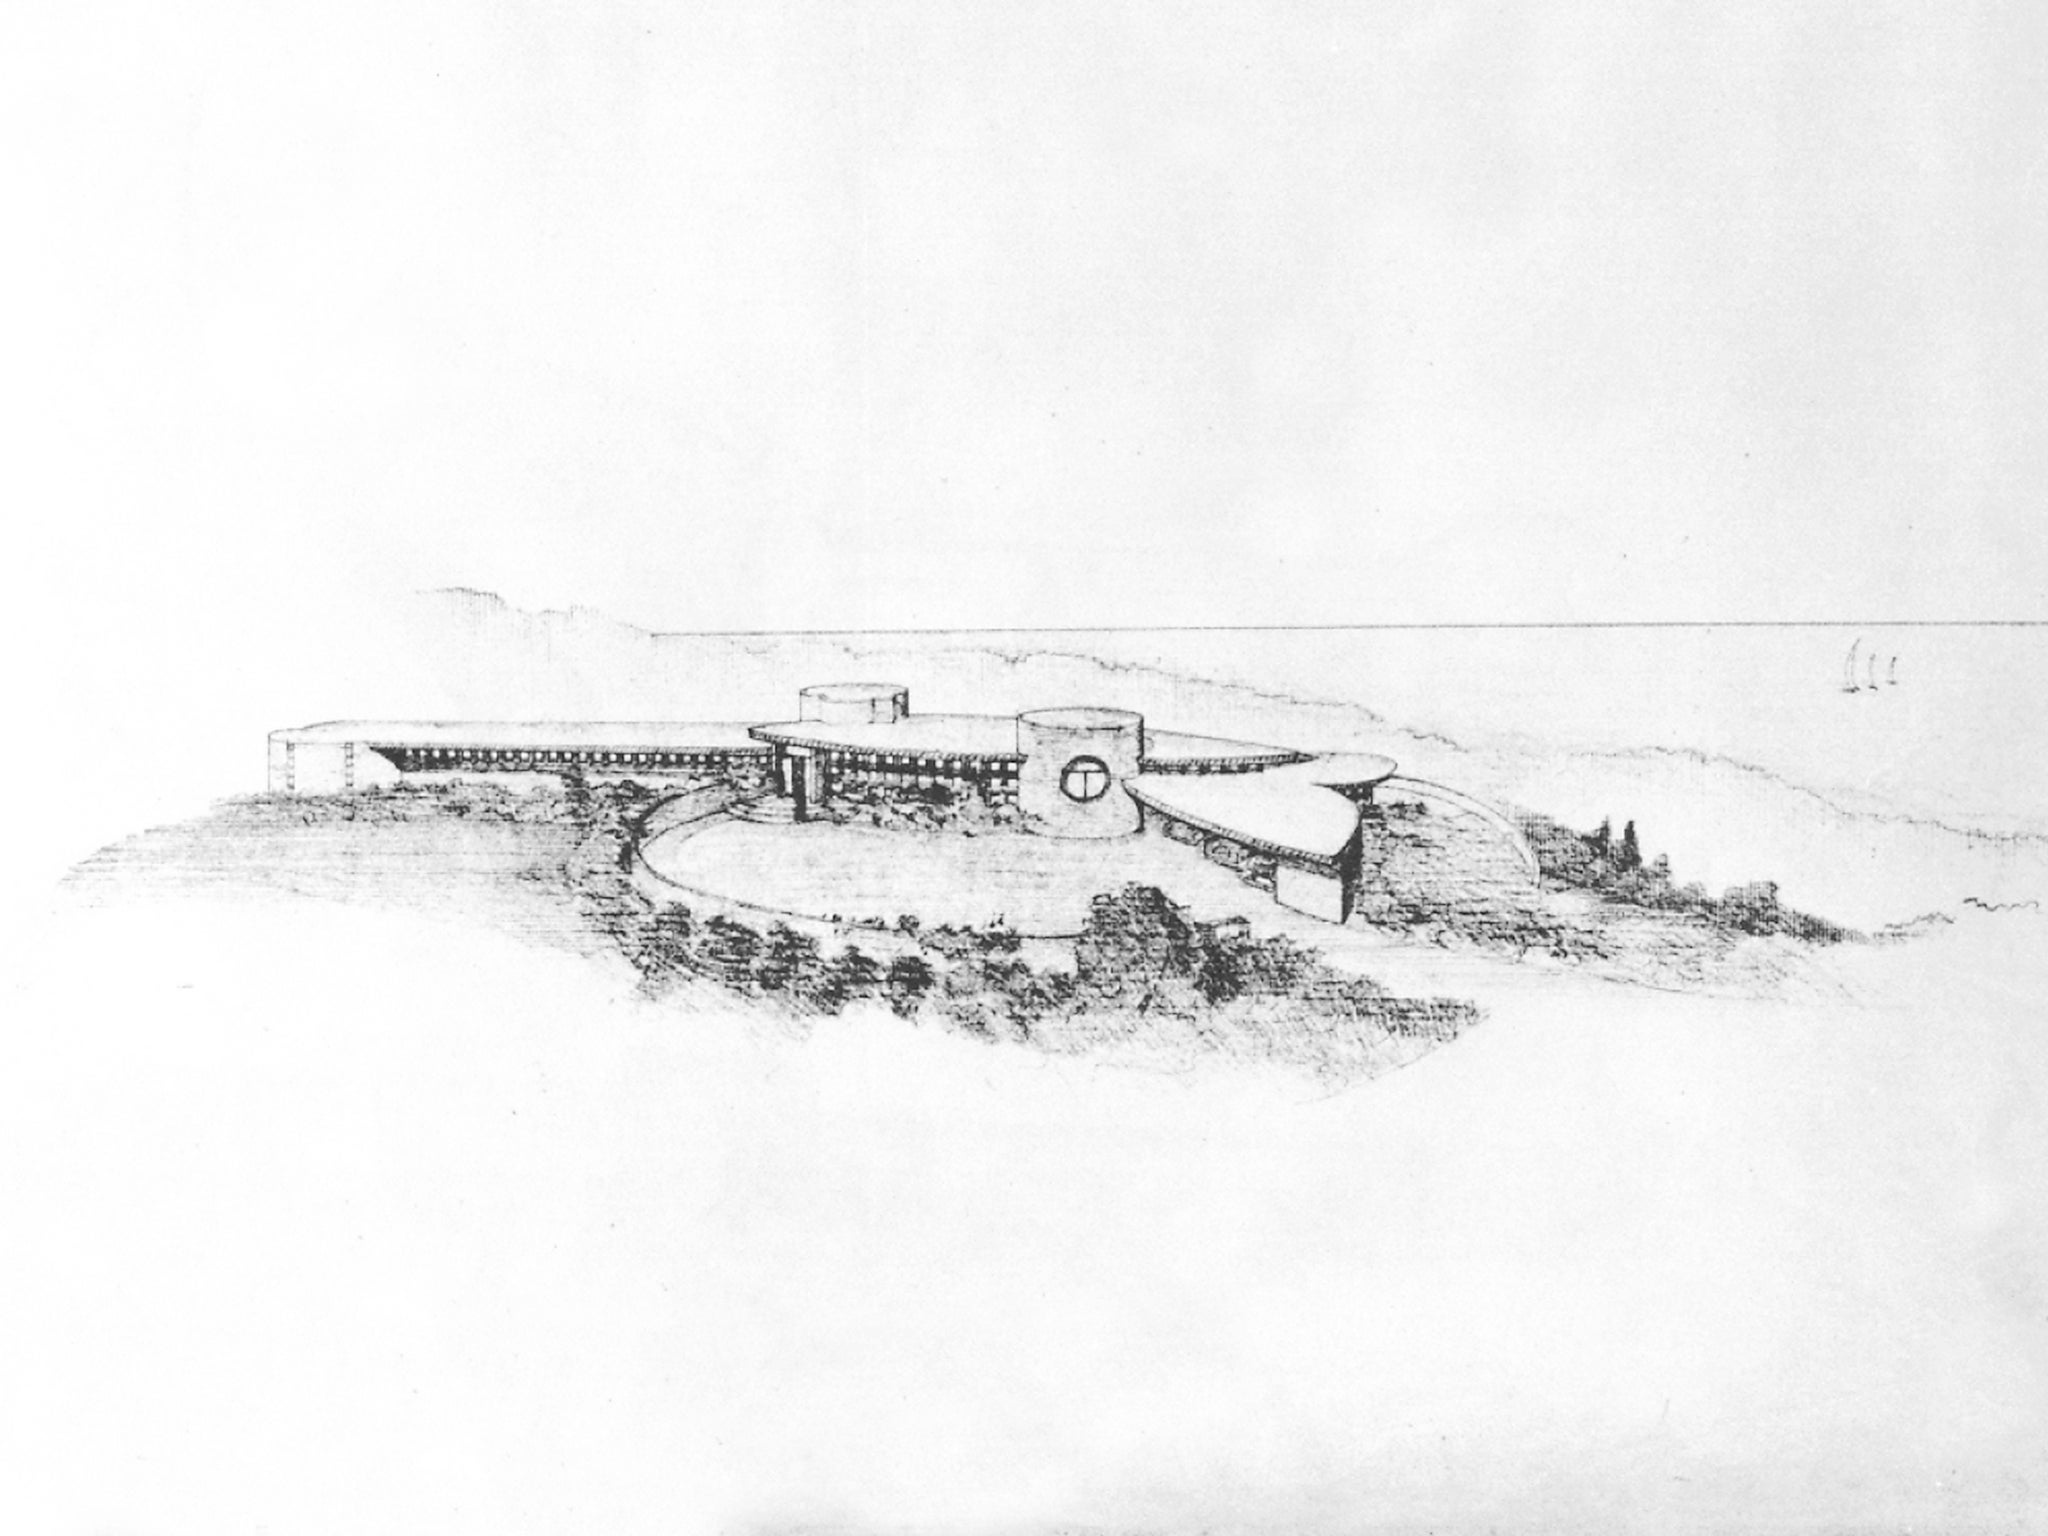 &#13;
It's not 'so long': the blueprint for the new FLW house to be built in Somerset ( Frank Lloyd Wright Foundation)&#13;